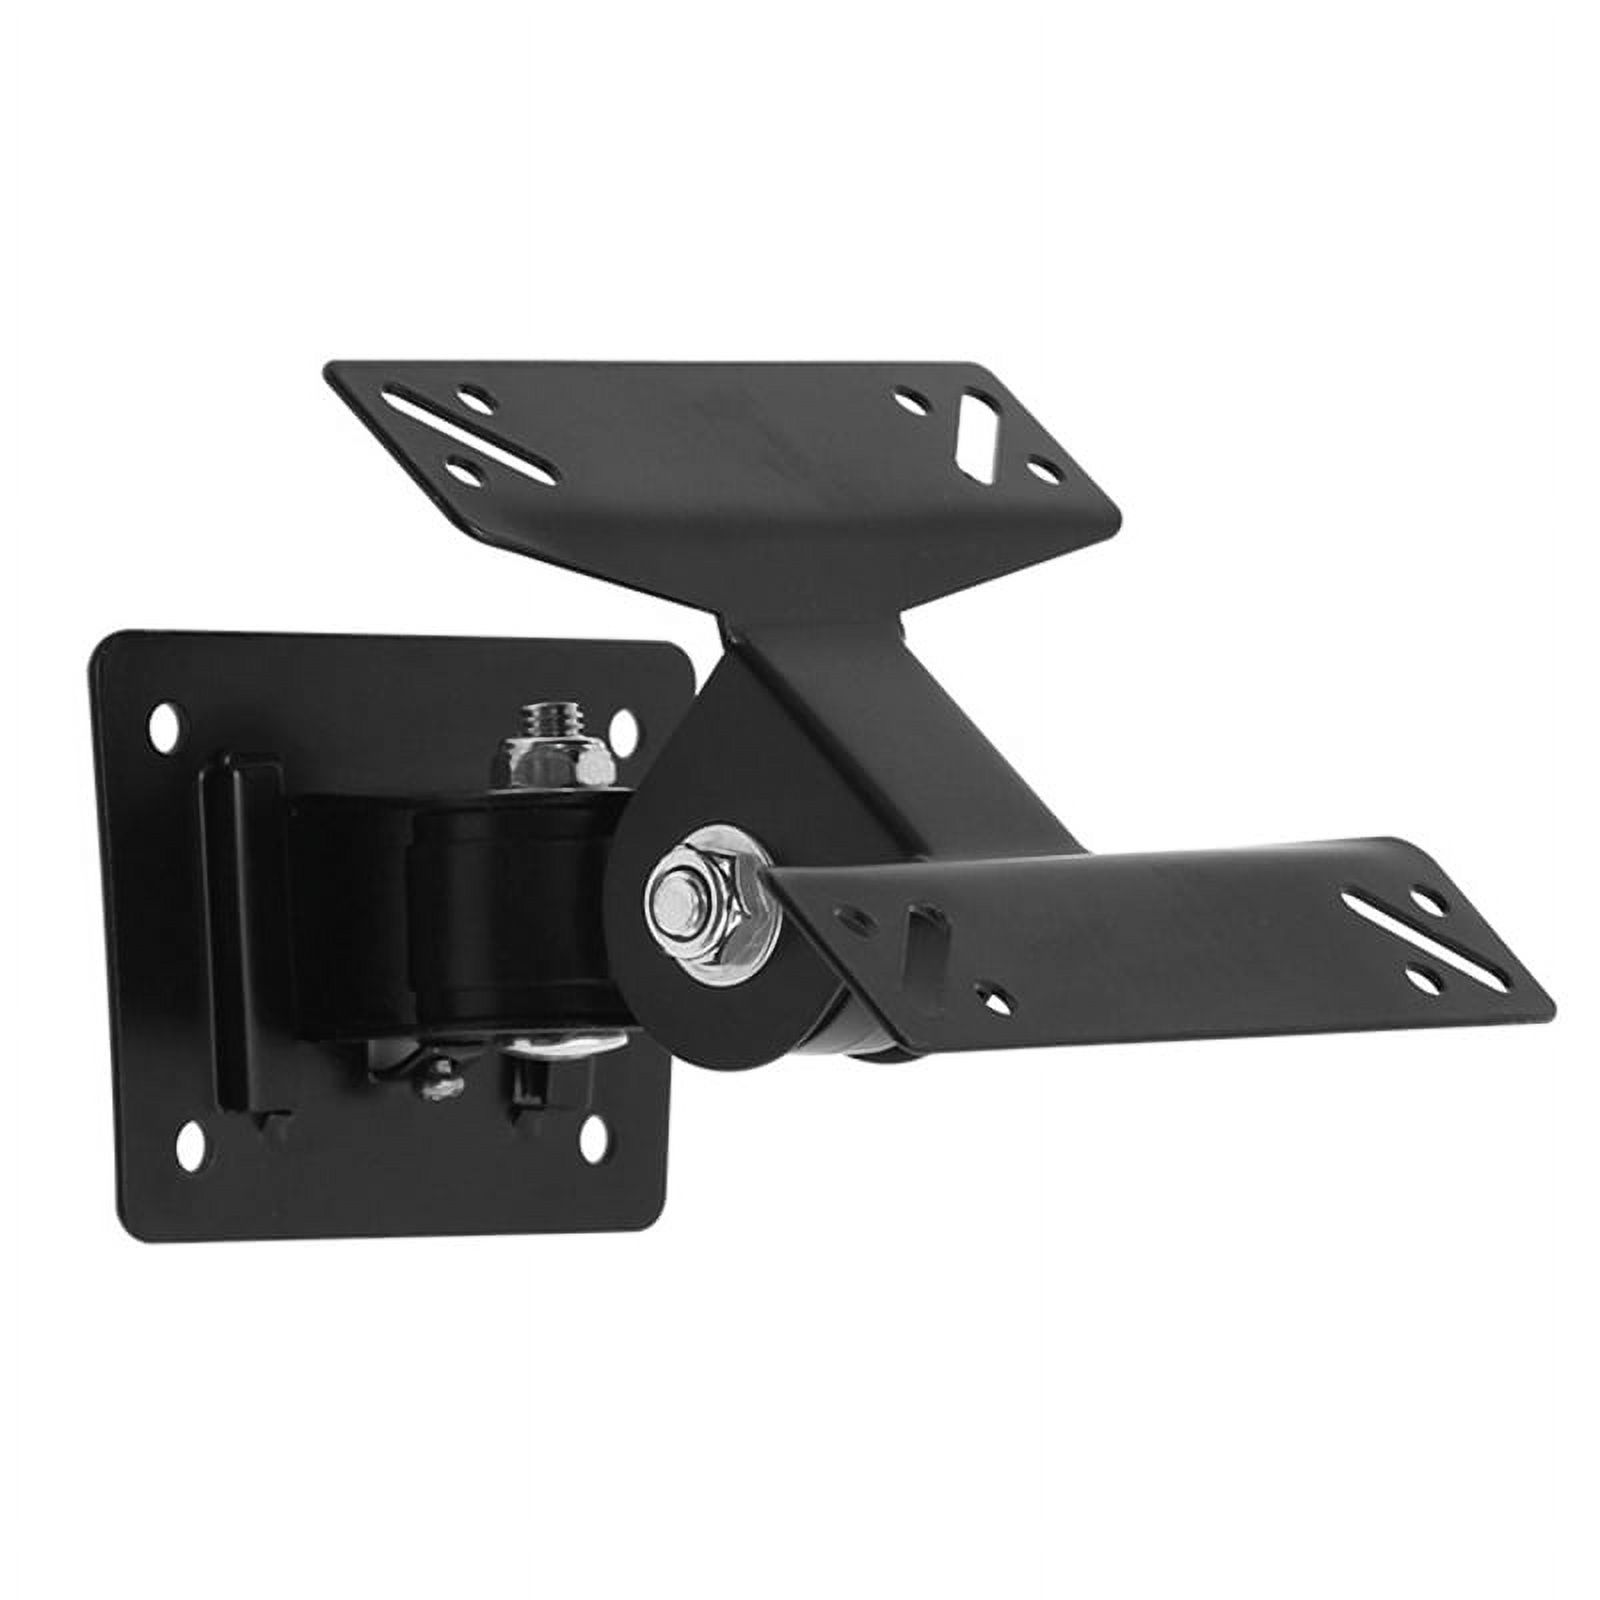 Universal Wall Mount Stand for 15-27inch LCD LED Screen Height Adjustable Monitor Retractable Wall for Tv Bracket - image 4 of 4